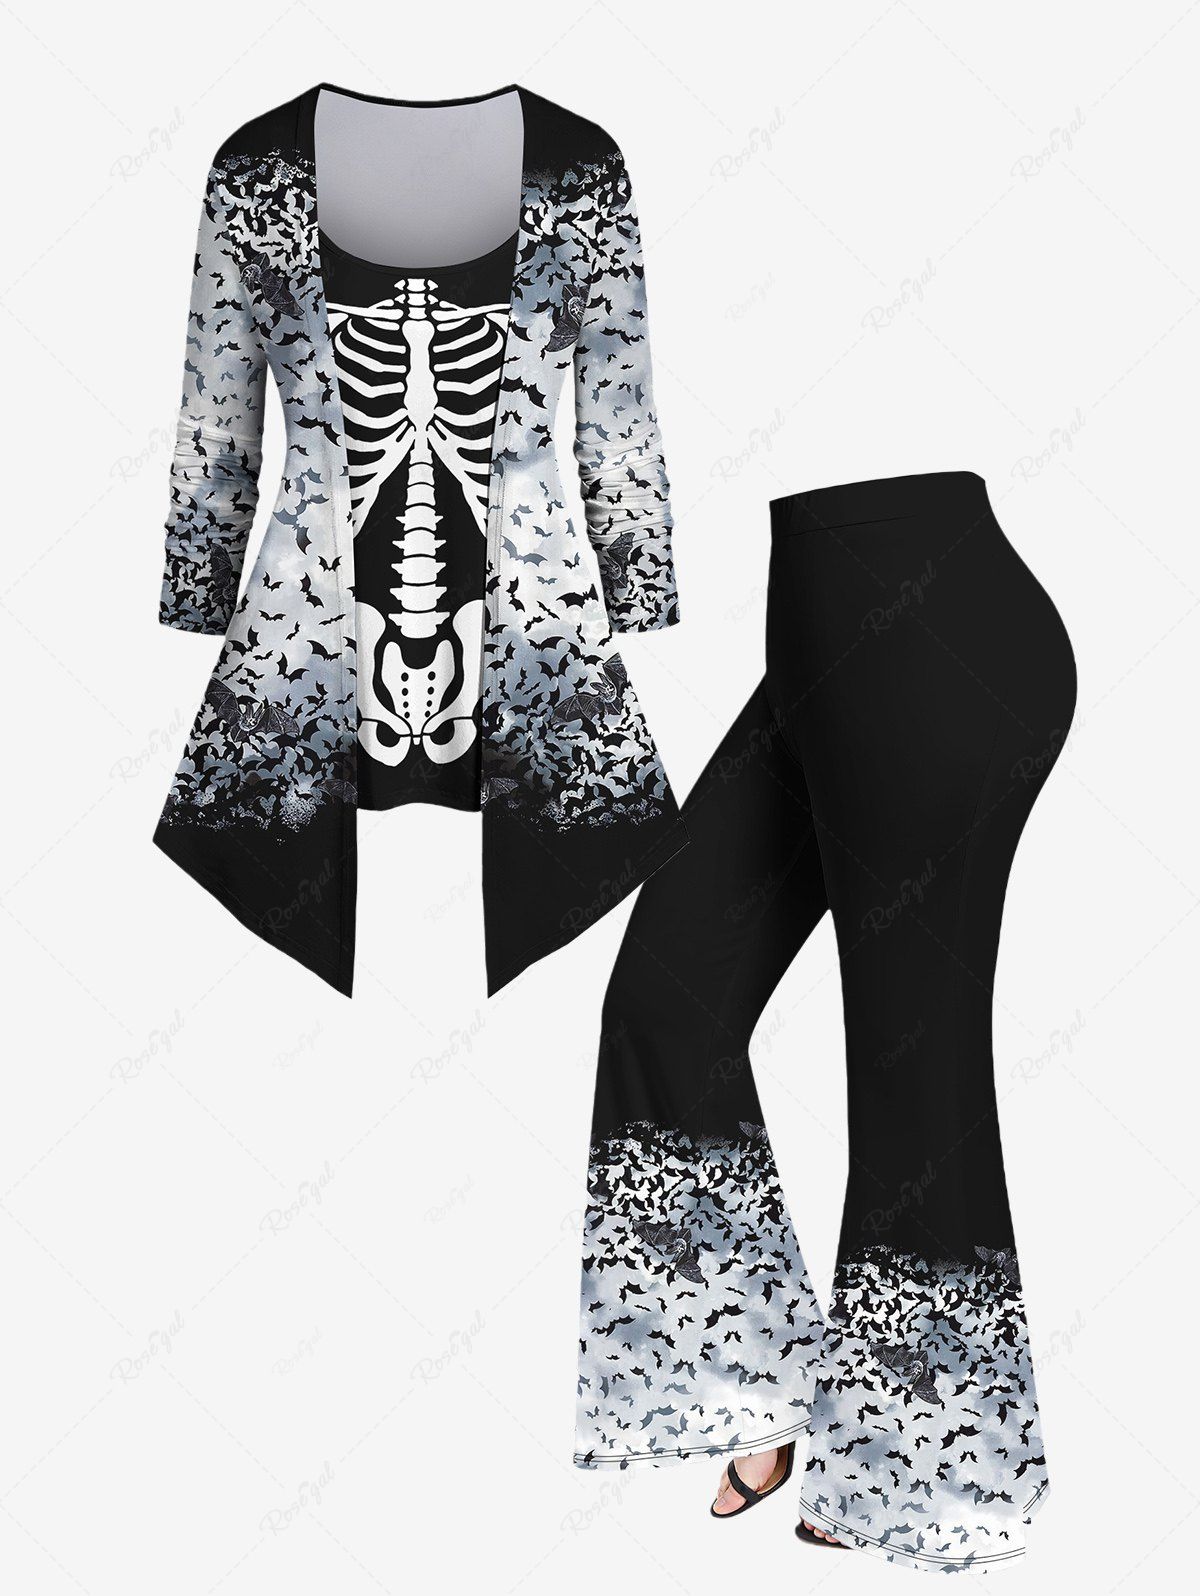 Sale Plus Size Skeleton Colorblock Bat Printed 2 In 1 T-shirt and Flare Pants Outfit  